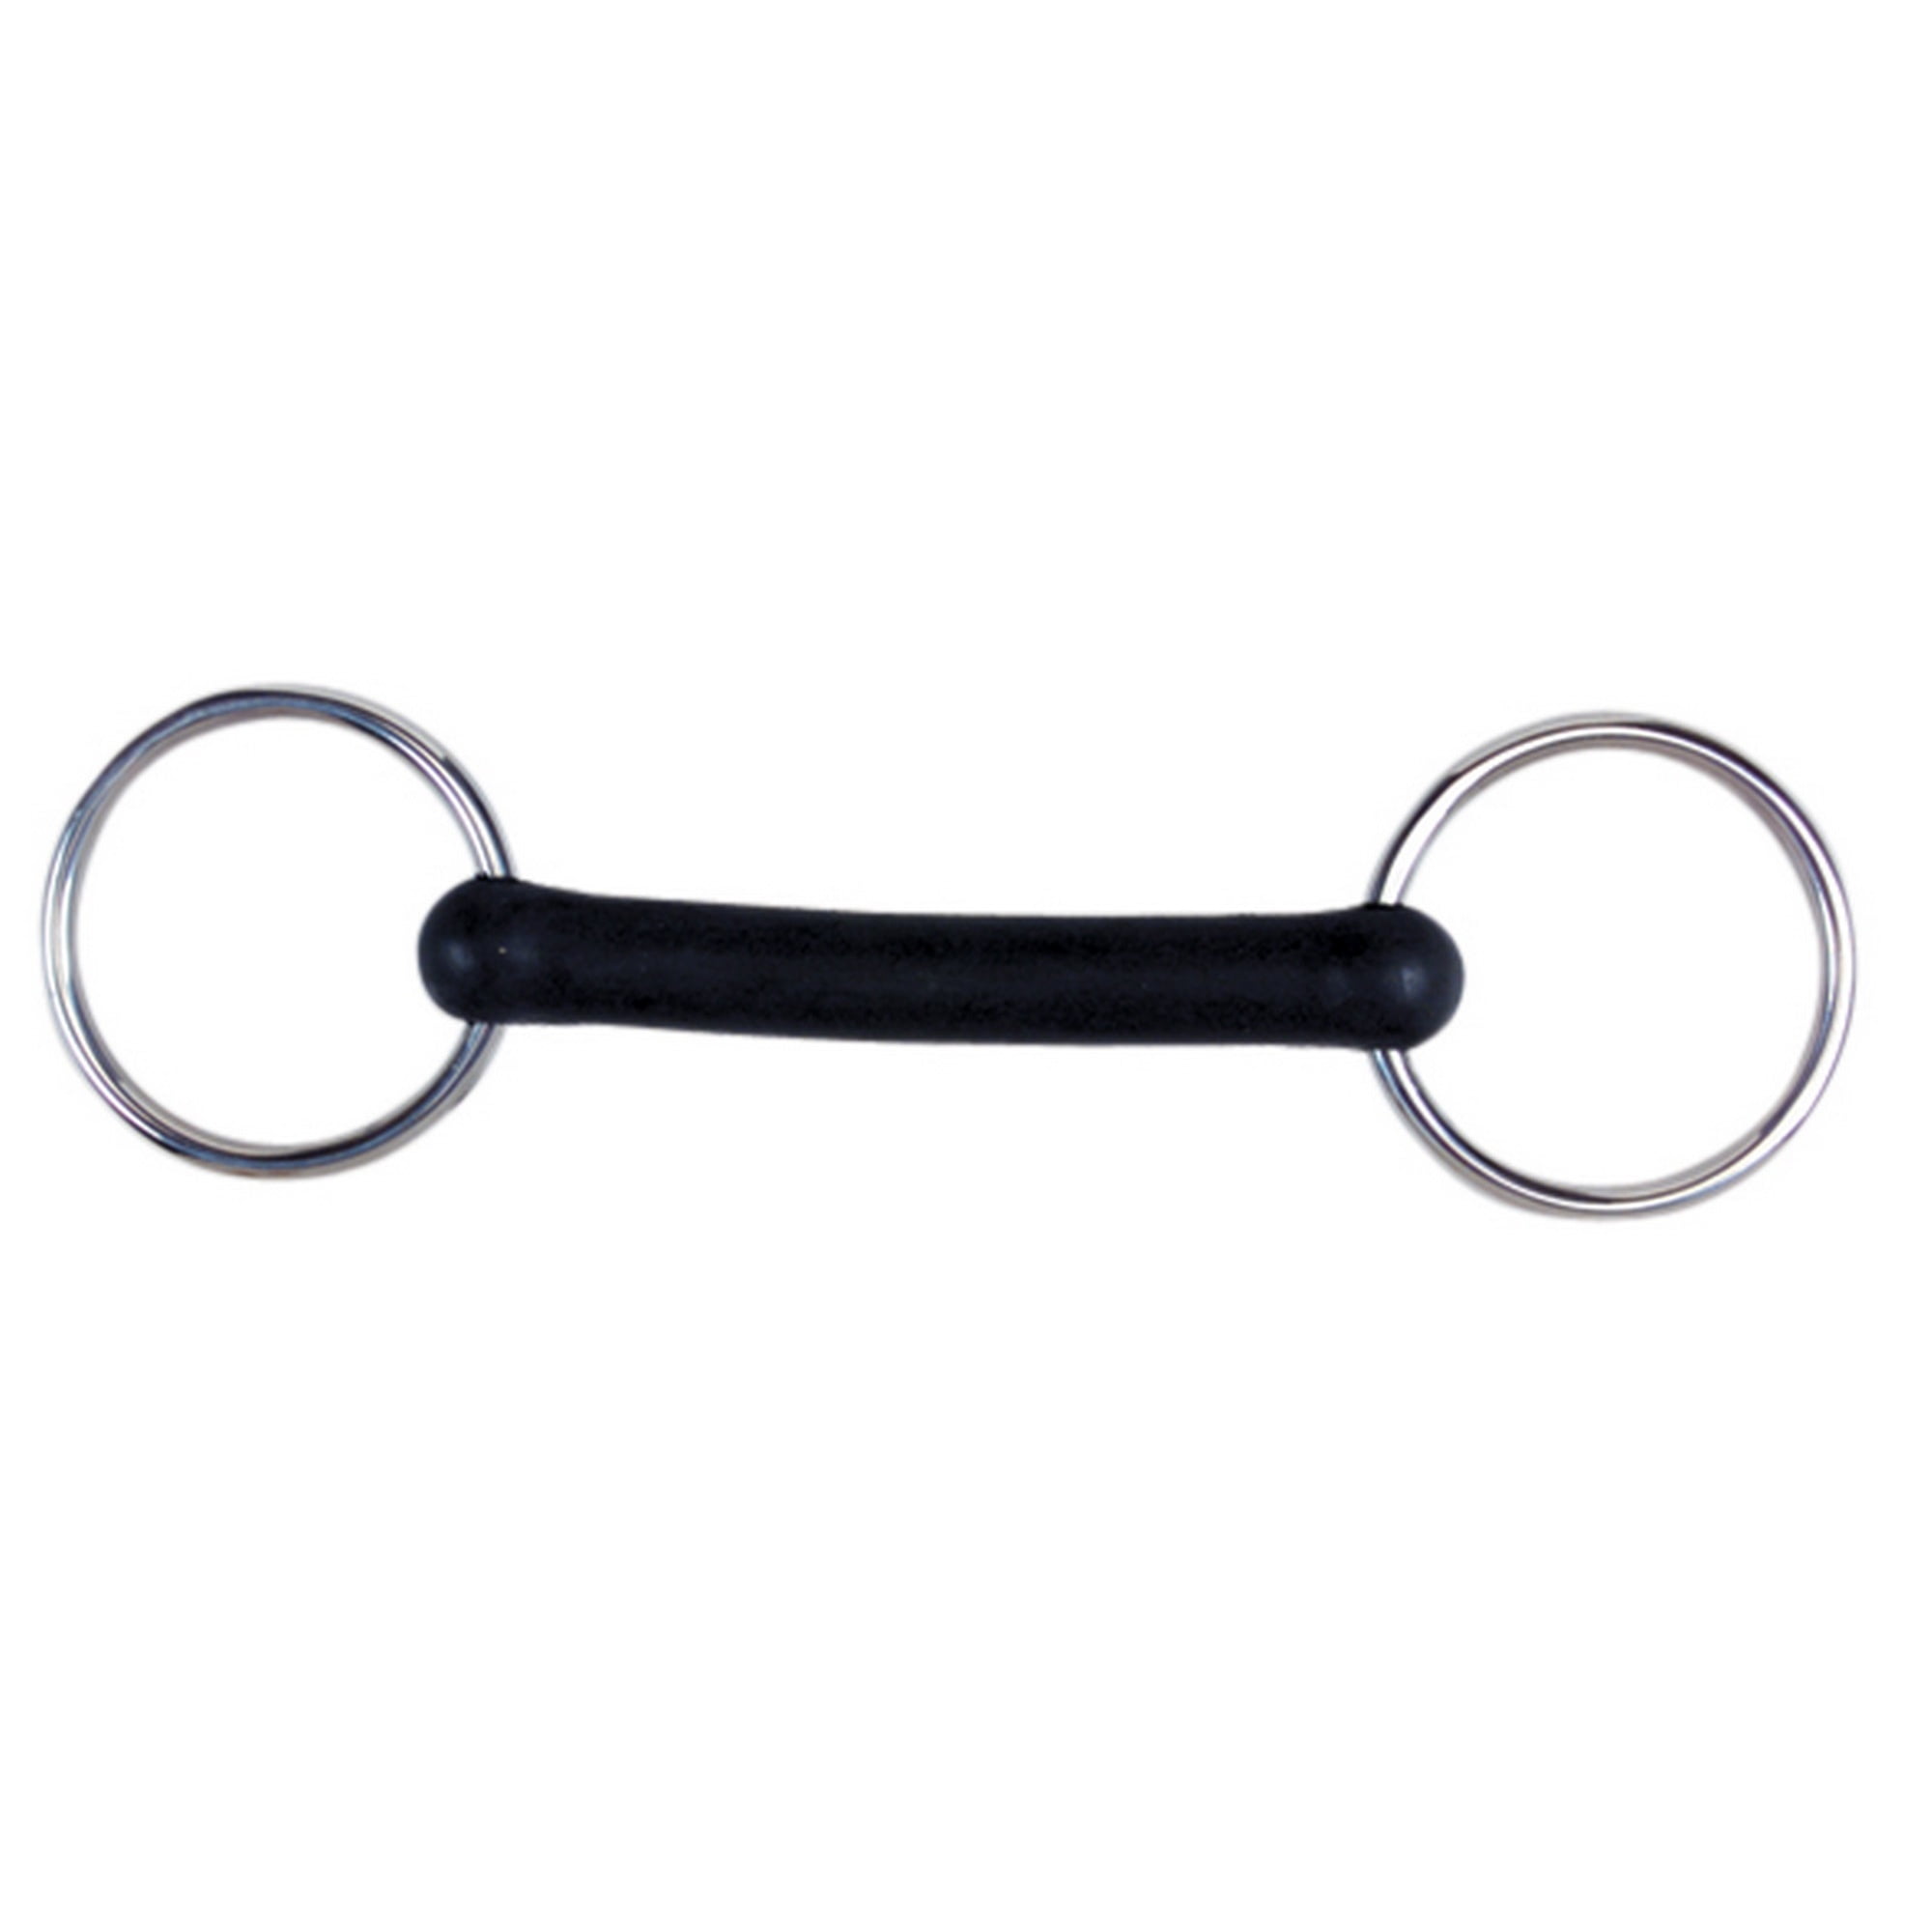 7" FREE Delivery Flexi Mullen Mouth Loose Ring Snaffle Bit 4.5" 